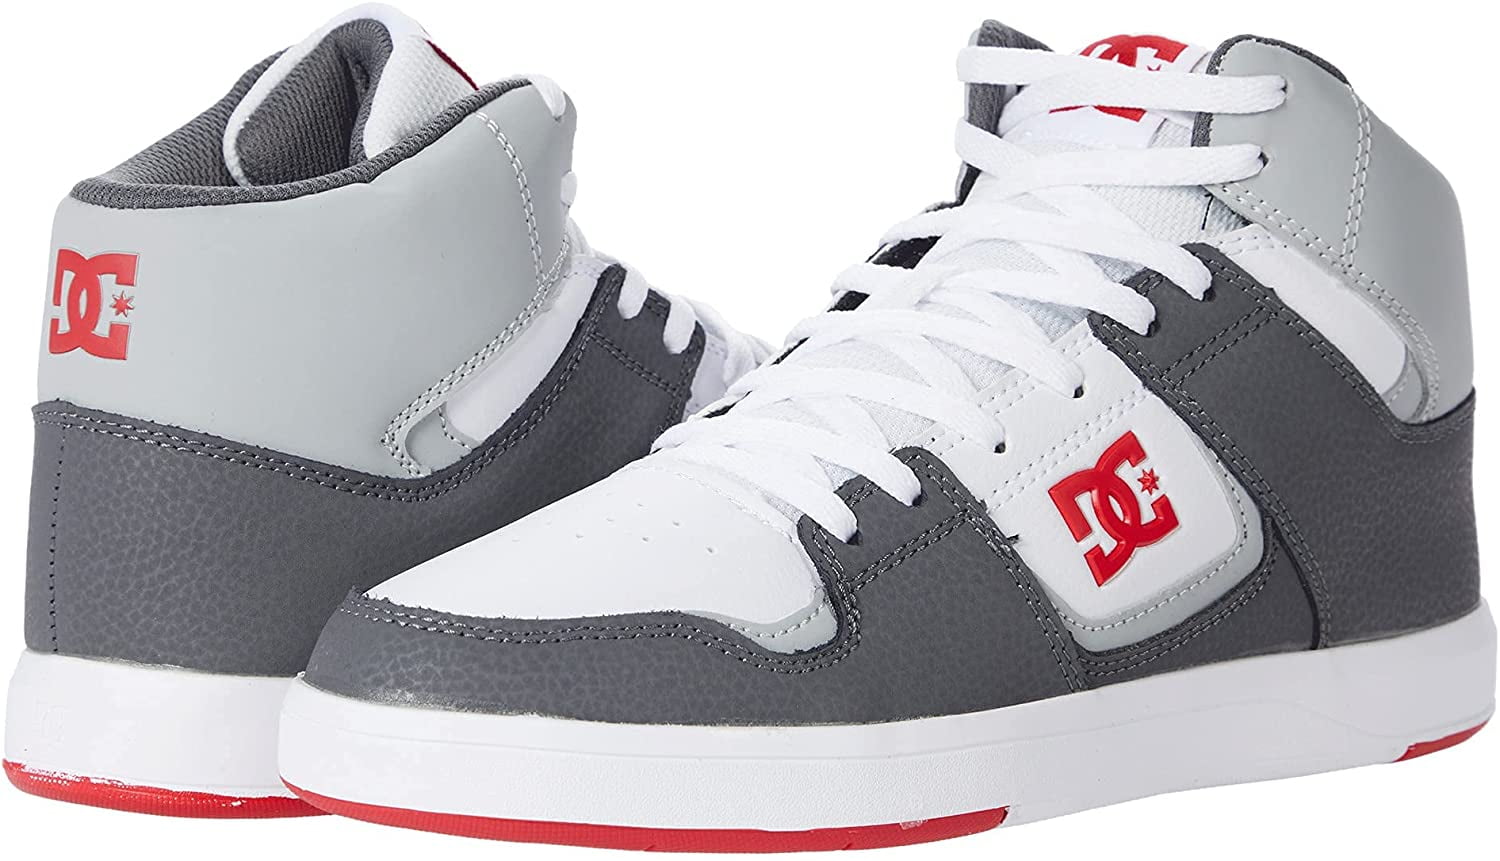 DC womens Cure Casual High-top Skate Shoes Sneakers 10 White/Grey/Red ...